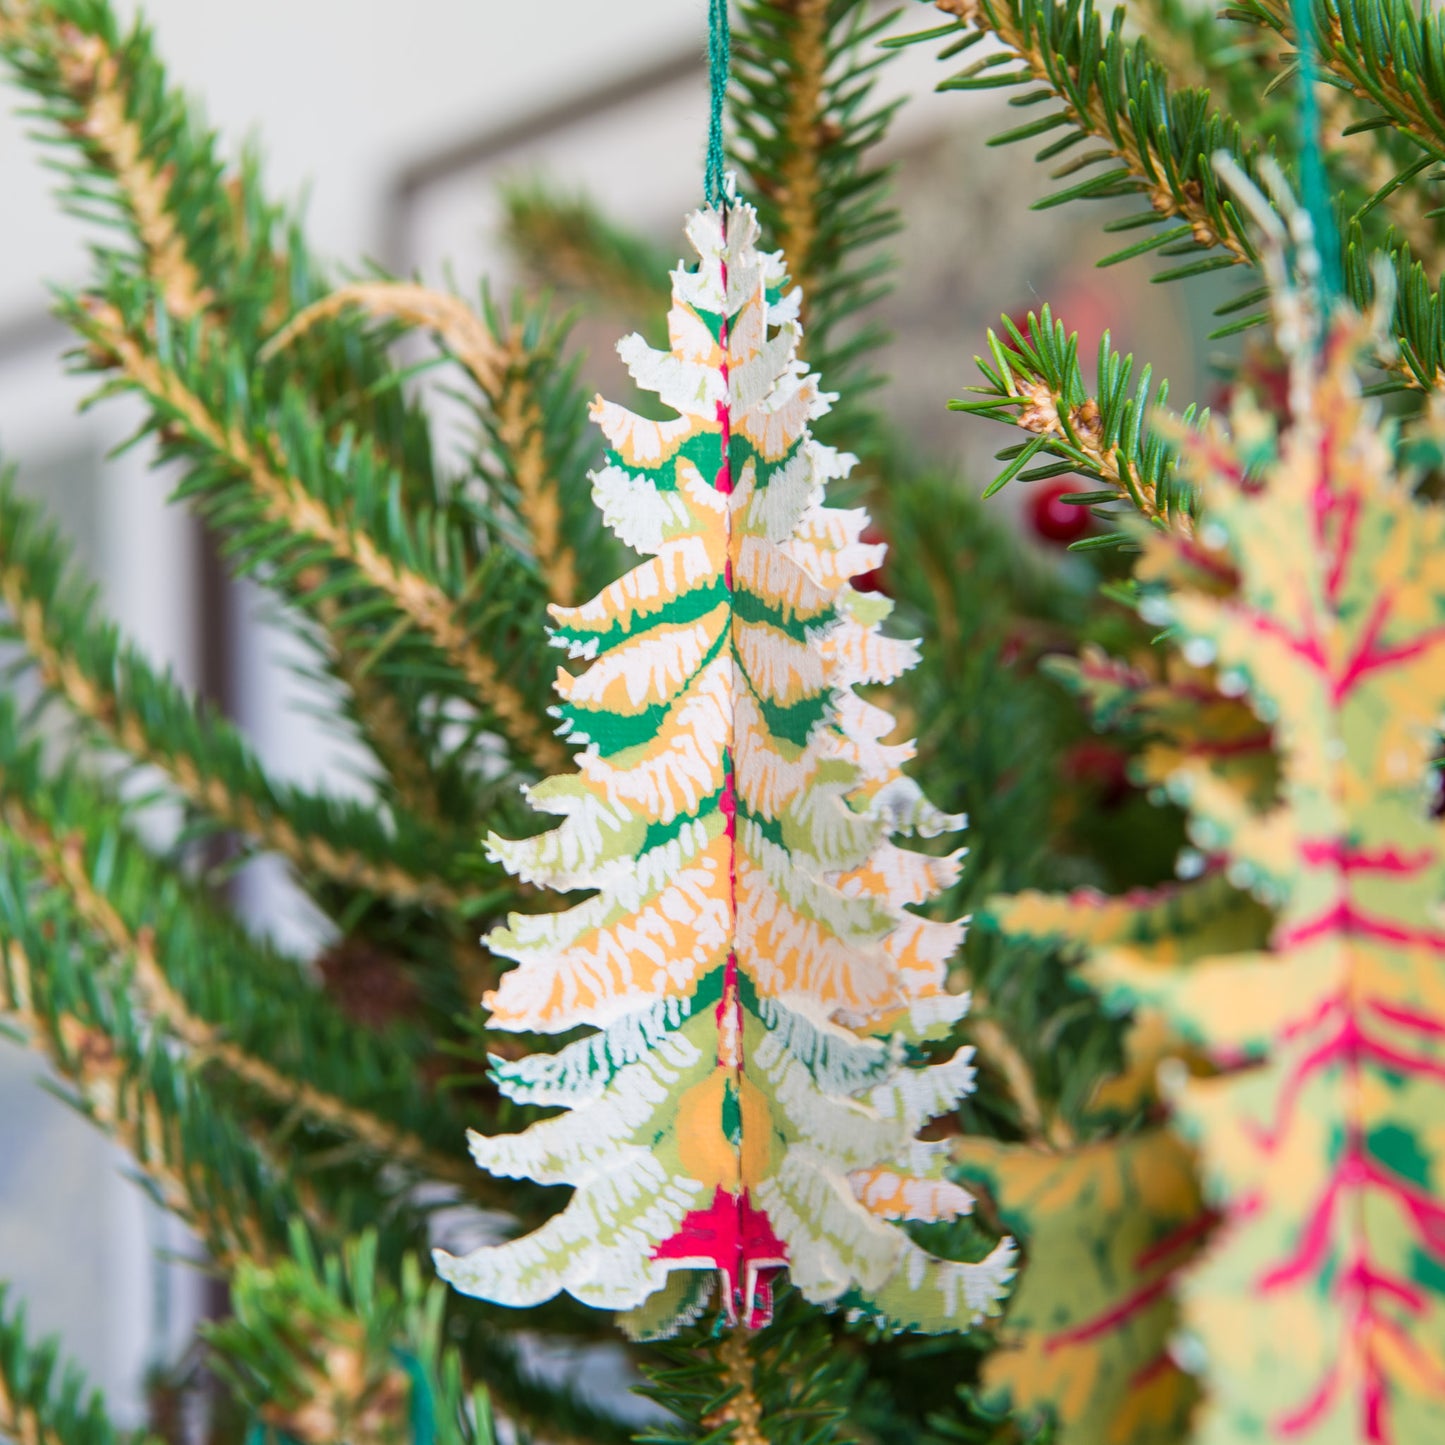 Forest Paper Ornaments